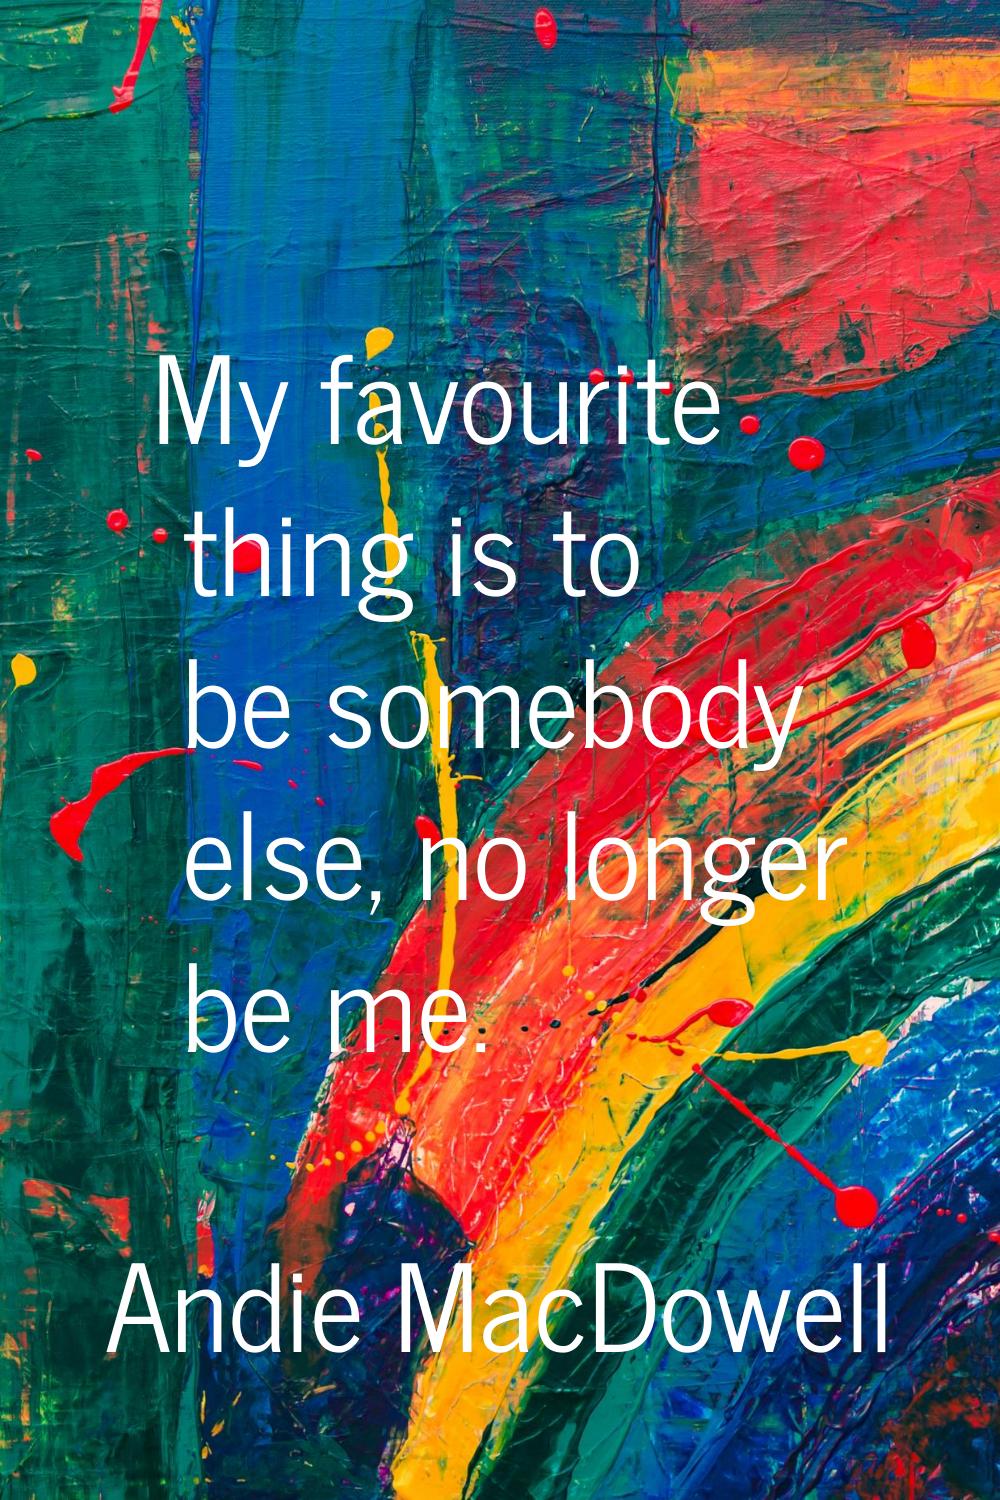 My favourite thing is to be somebody else, no longer be me.